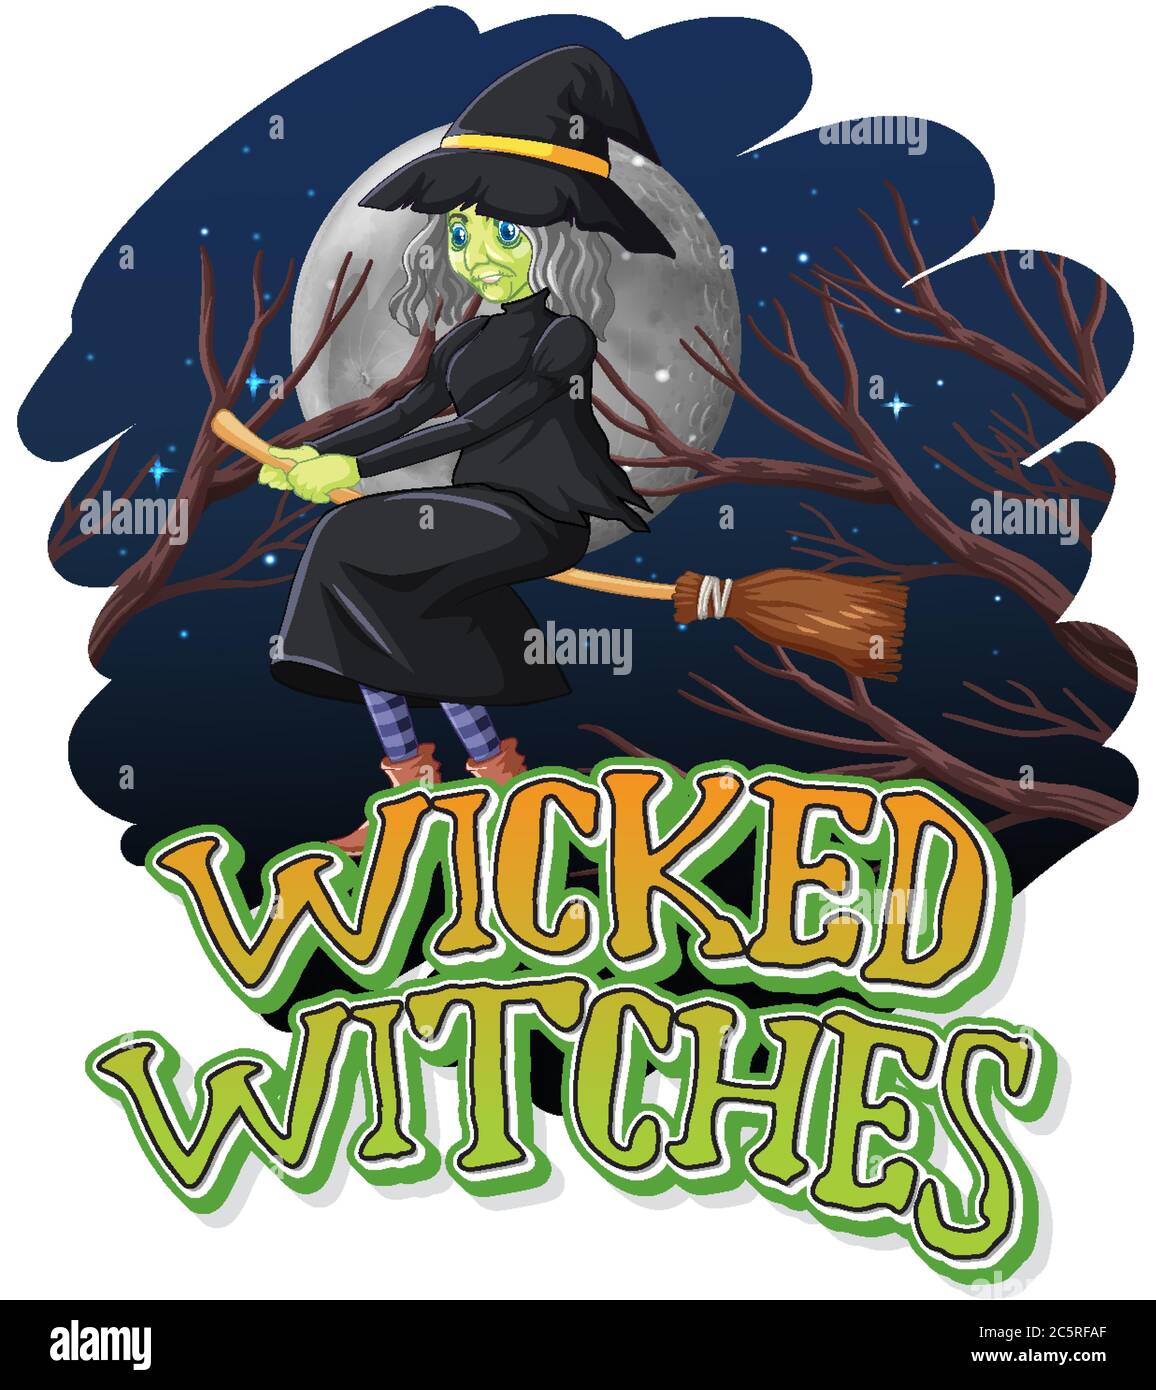 Wicked witches on night background illustration Stock Vector